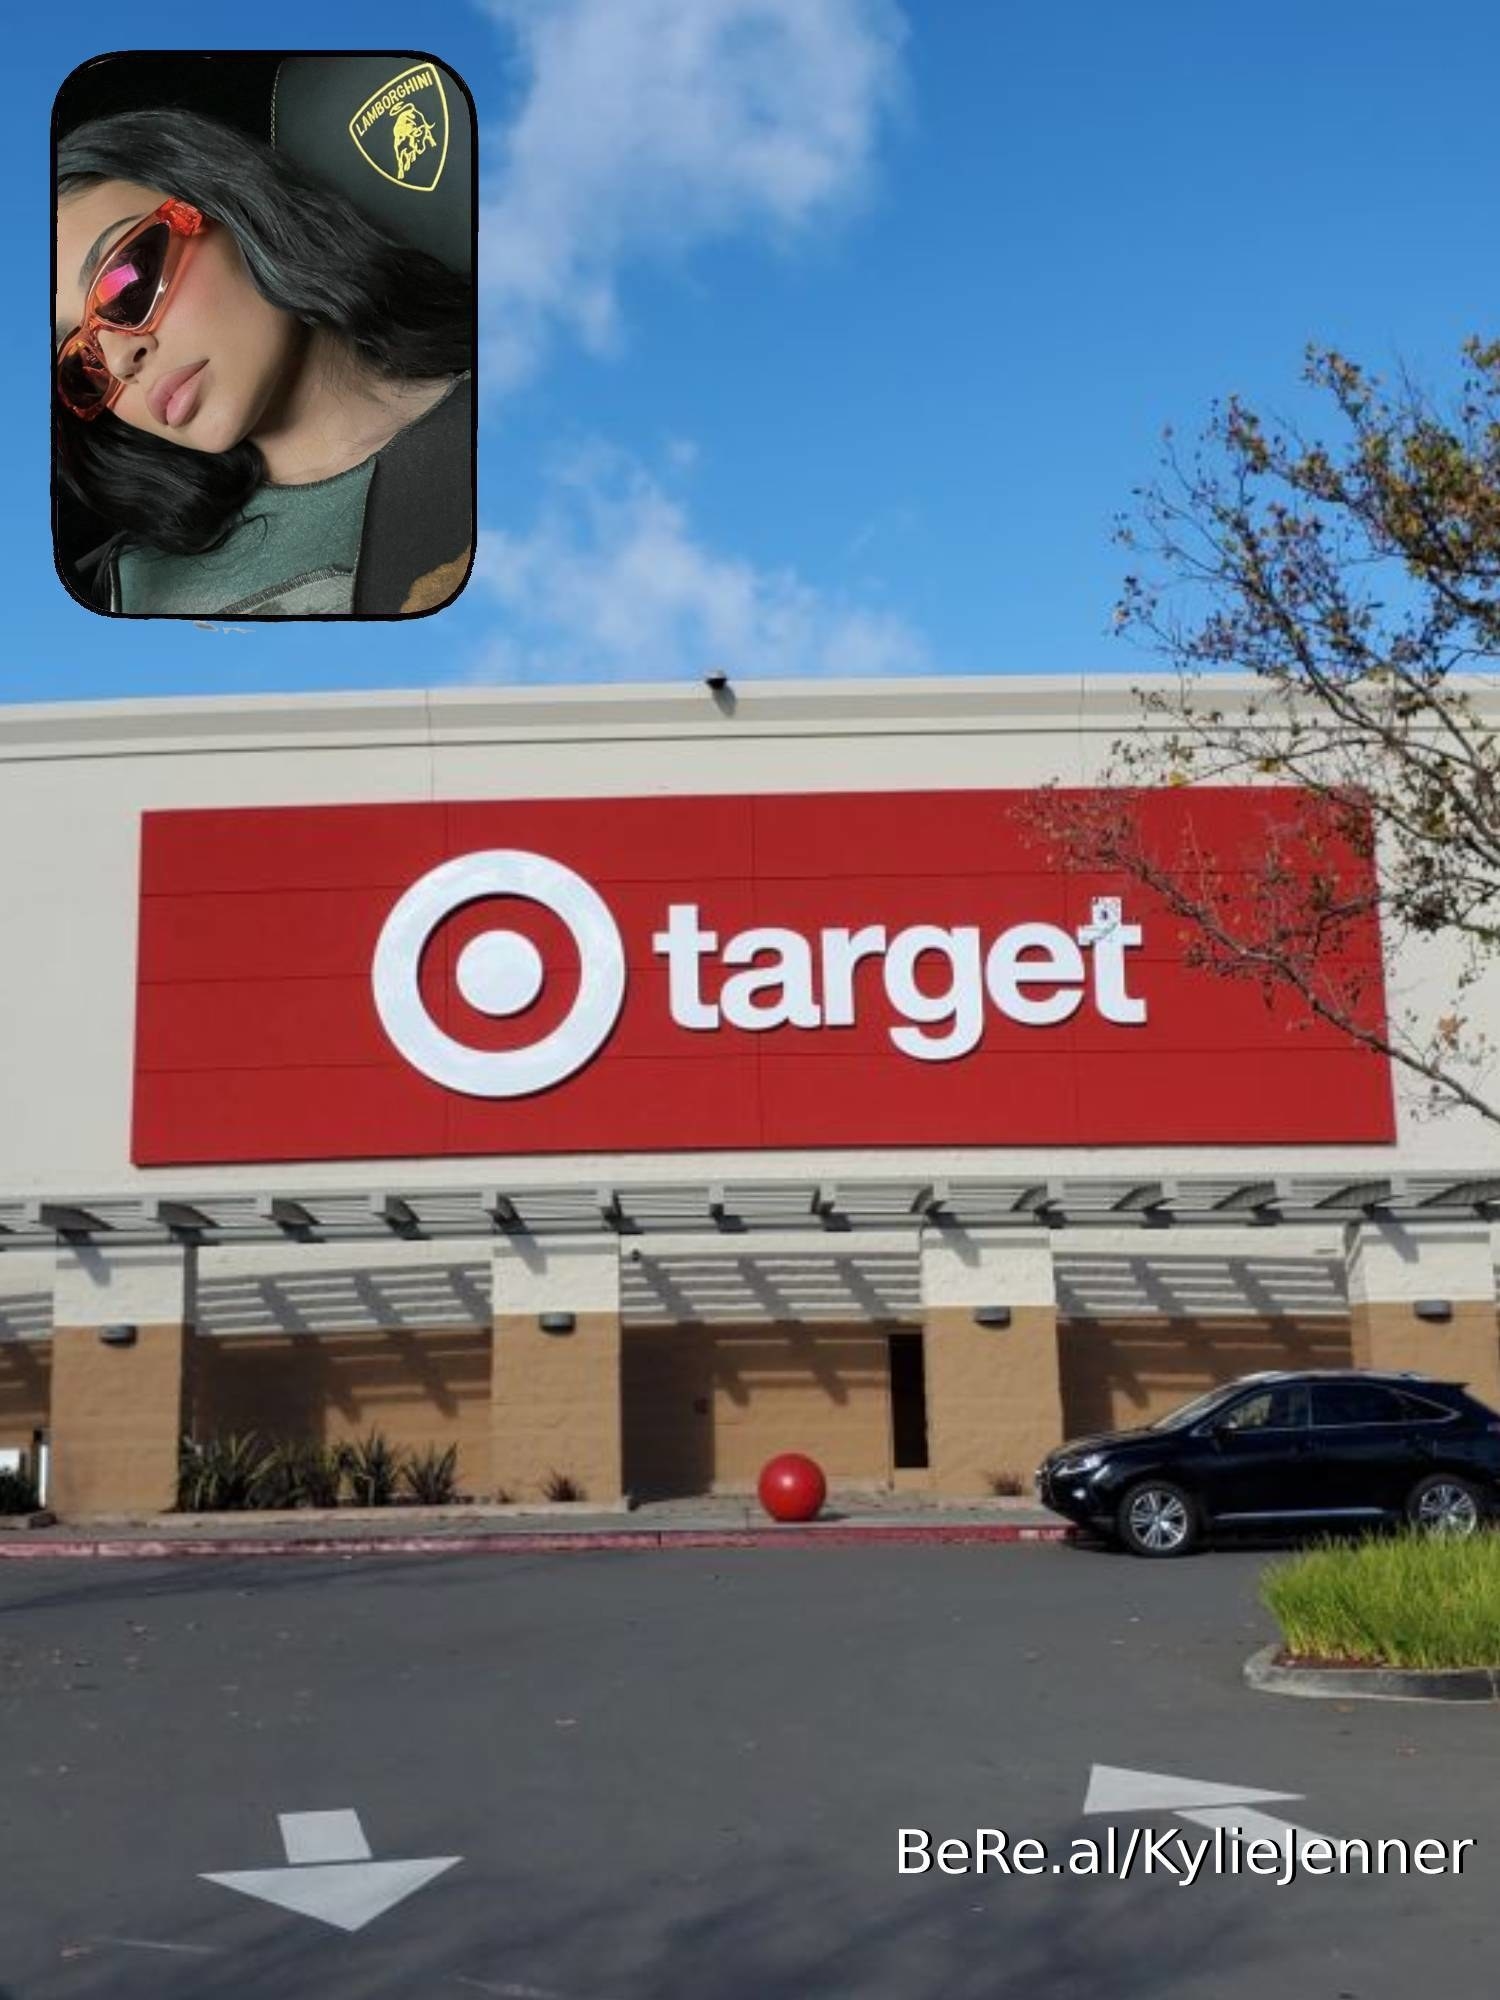 A Kylie Jenner selfie superimposed on a photo of the entrance to a Target store